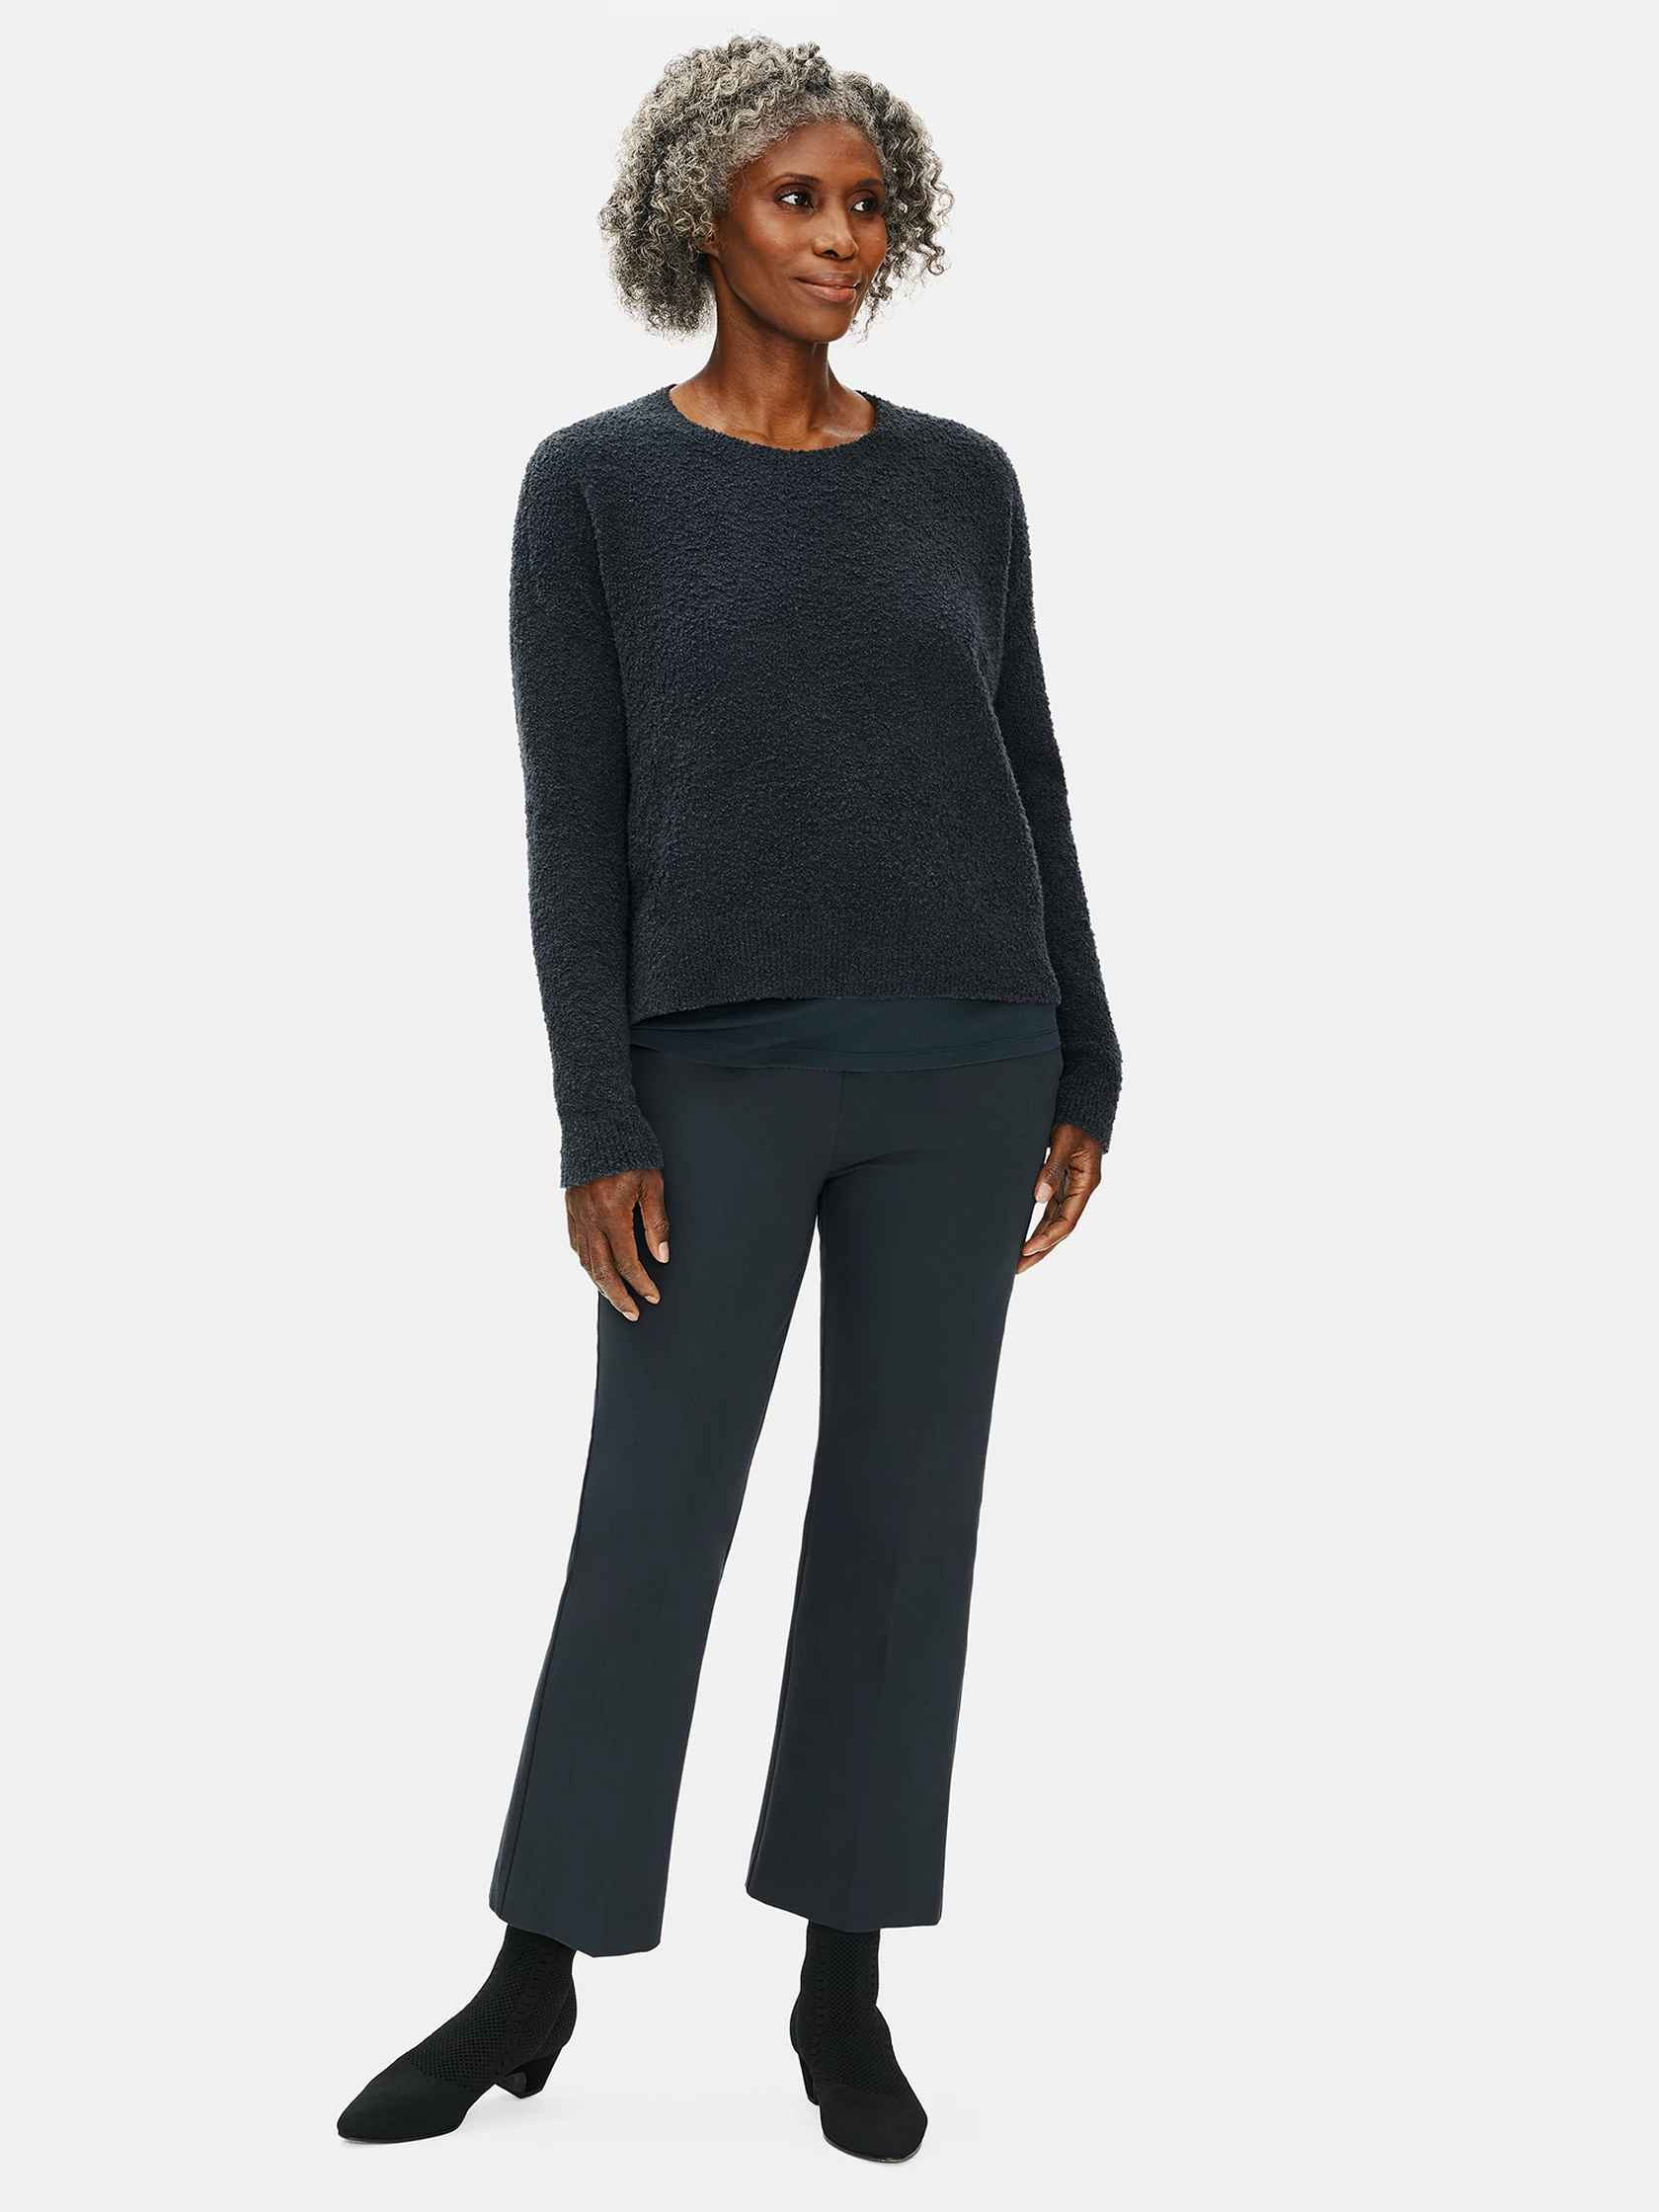 Organic Cotton Twill Flare Cropped Pant